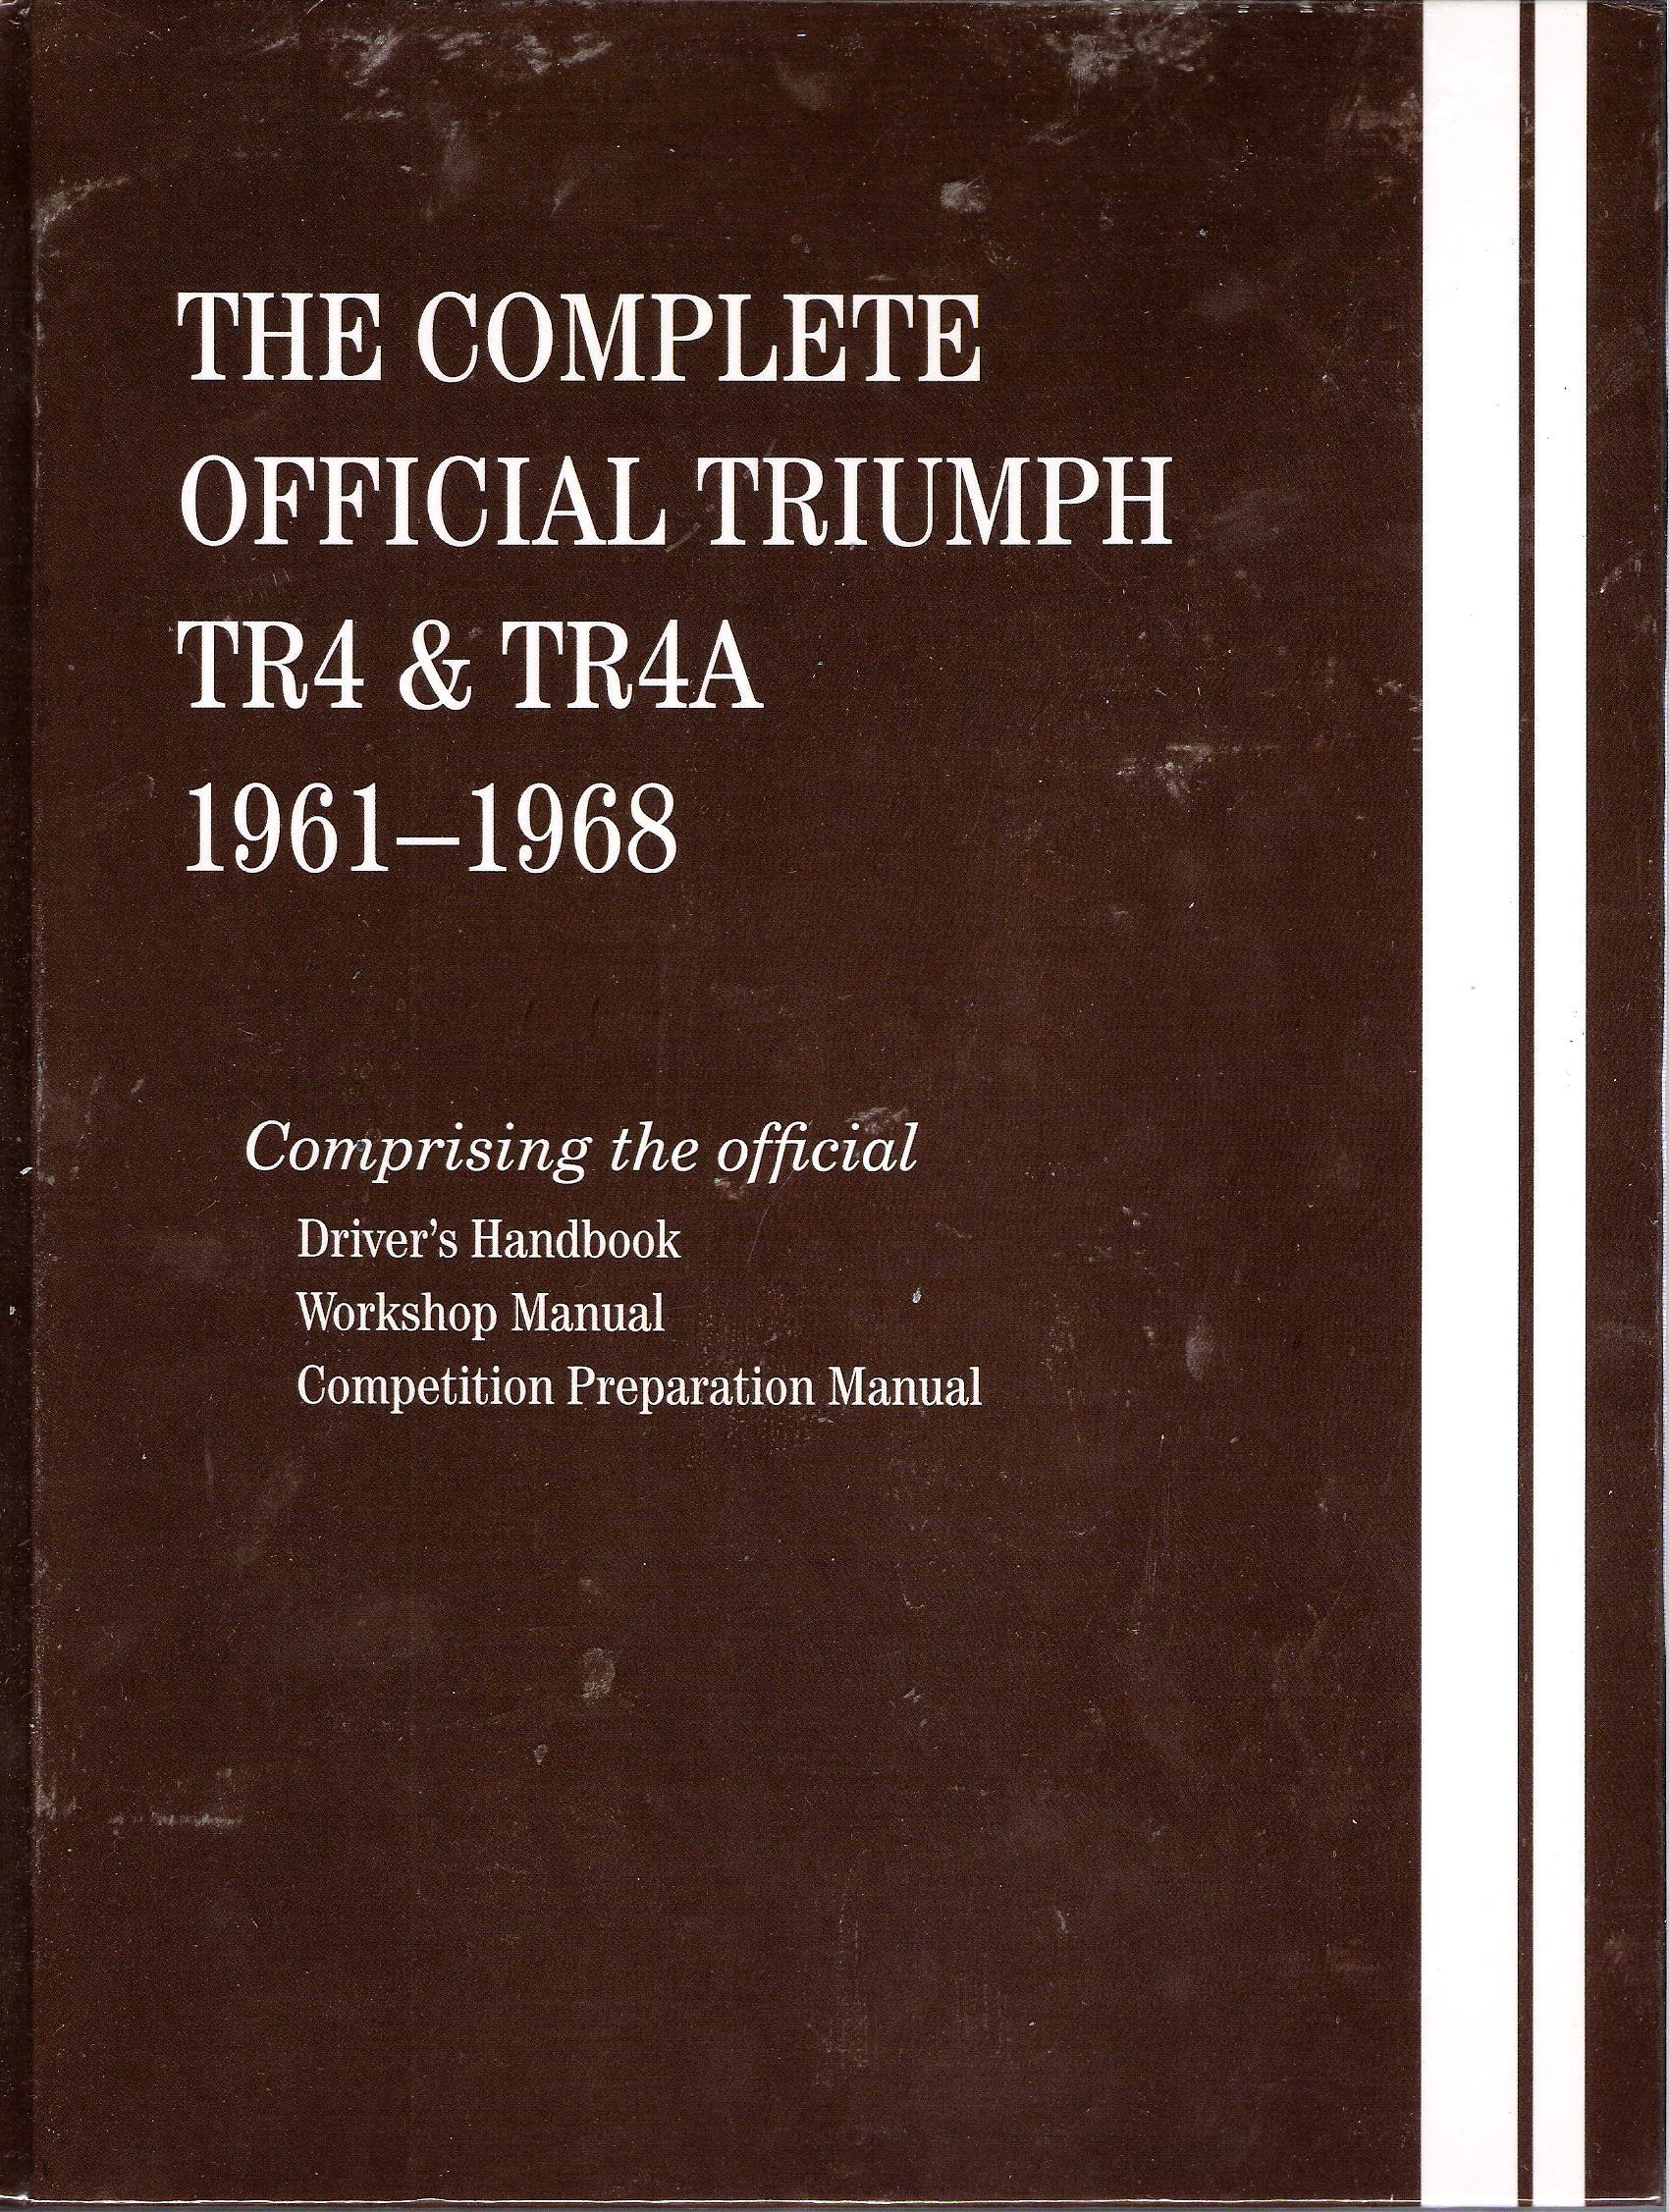 1961-1968 The Complete Official Triumph TR4 and TR4A Bentley Factory Service Manual